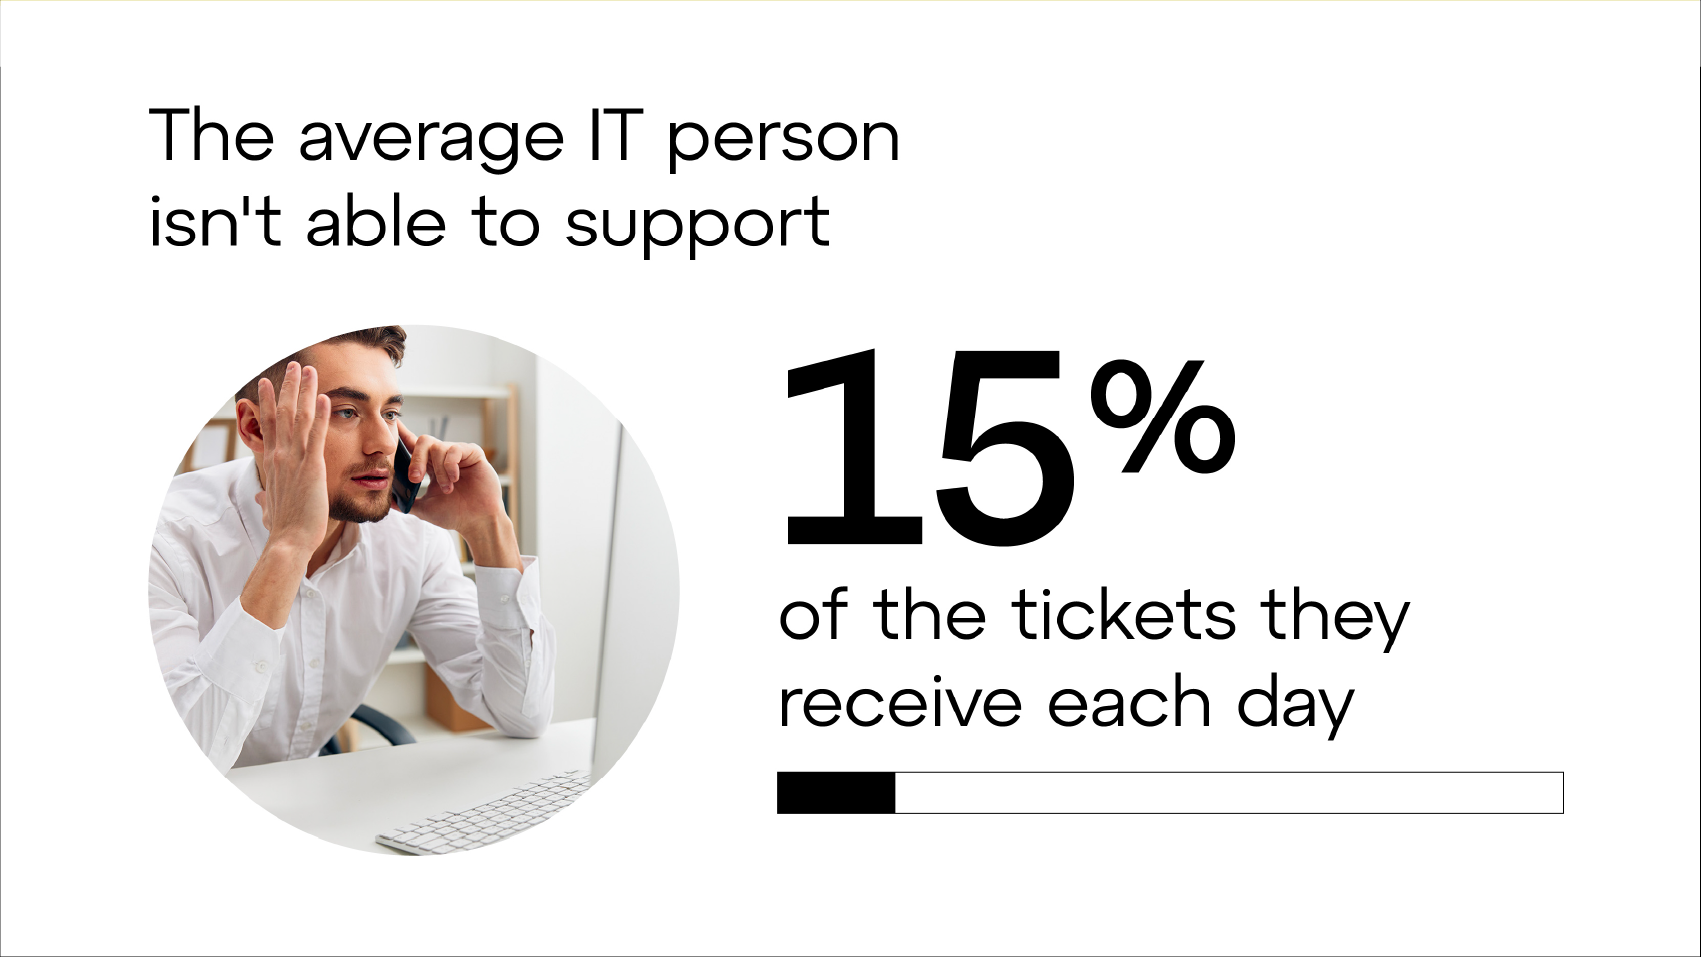 The average IT person isn't able to support 15% of the tickets they receive each day.